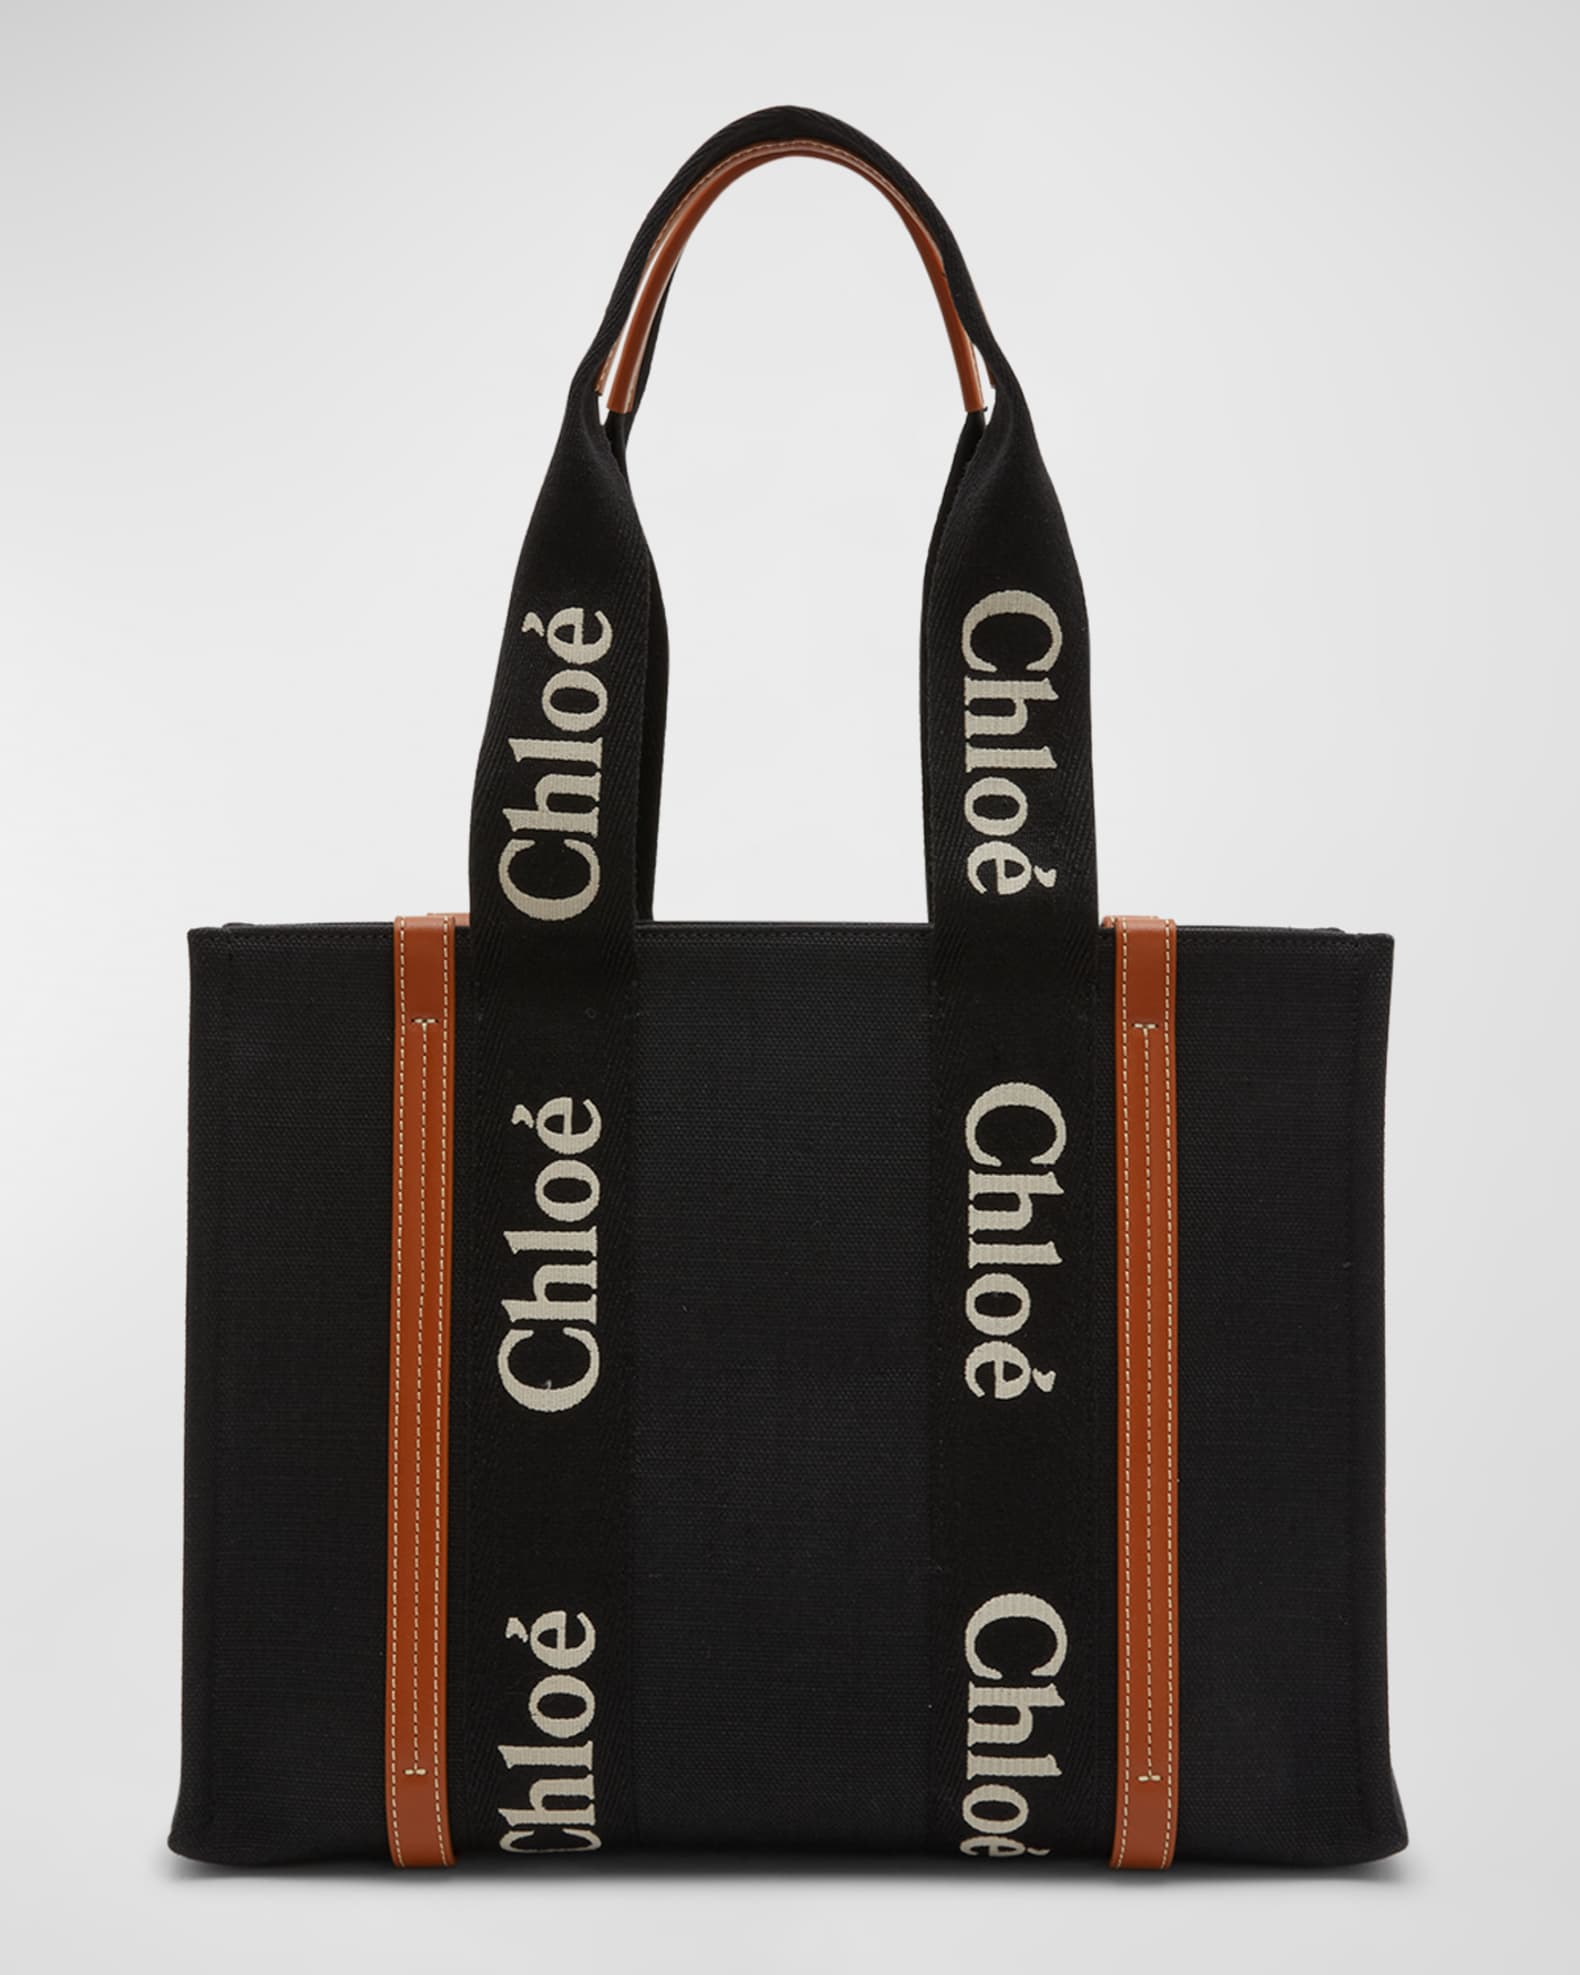 Chloé Woody Large Leather-trimmed Cotton-canvas Tote in White